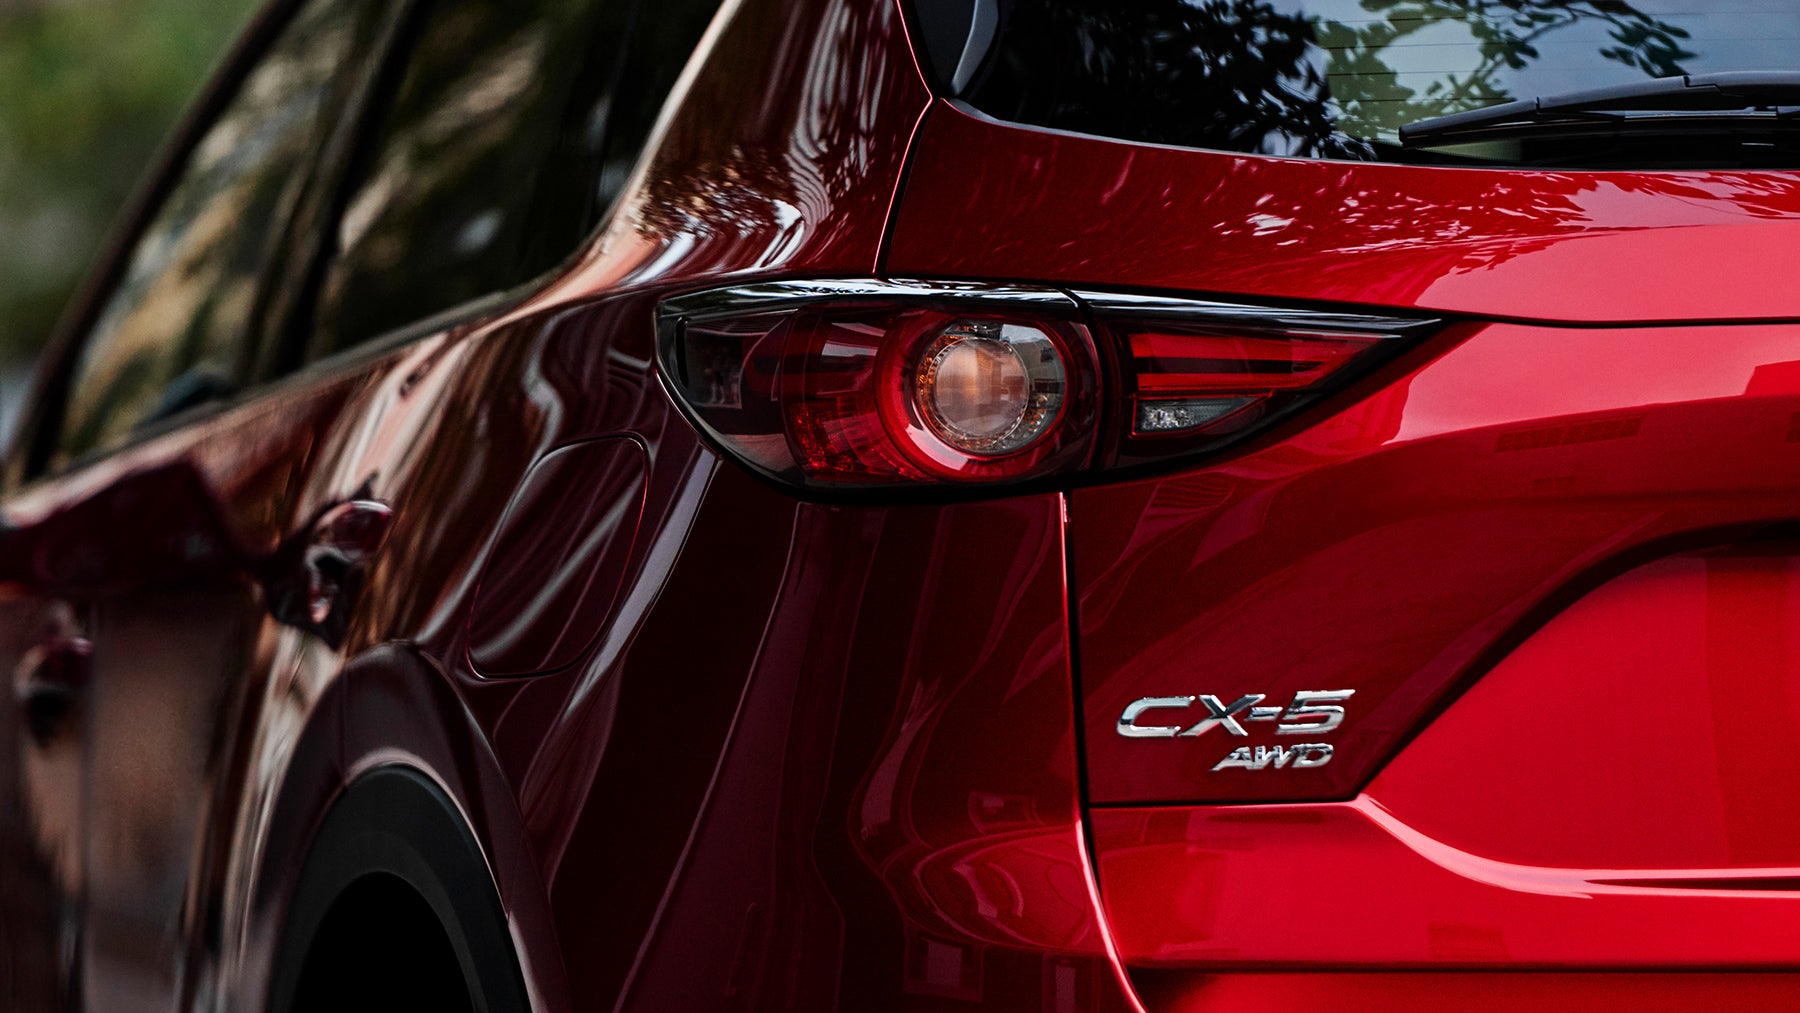 2019 Mazda CX-5 at Neil Huffman Mazda in Louisville KY